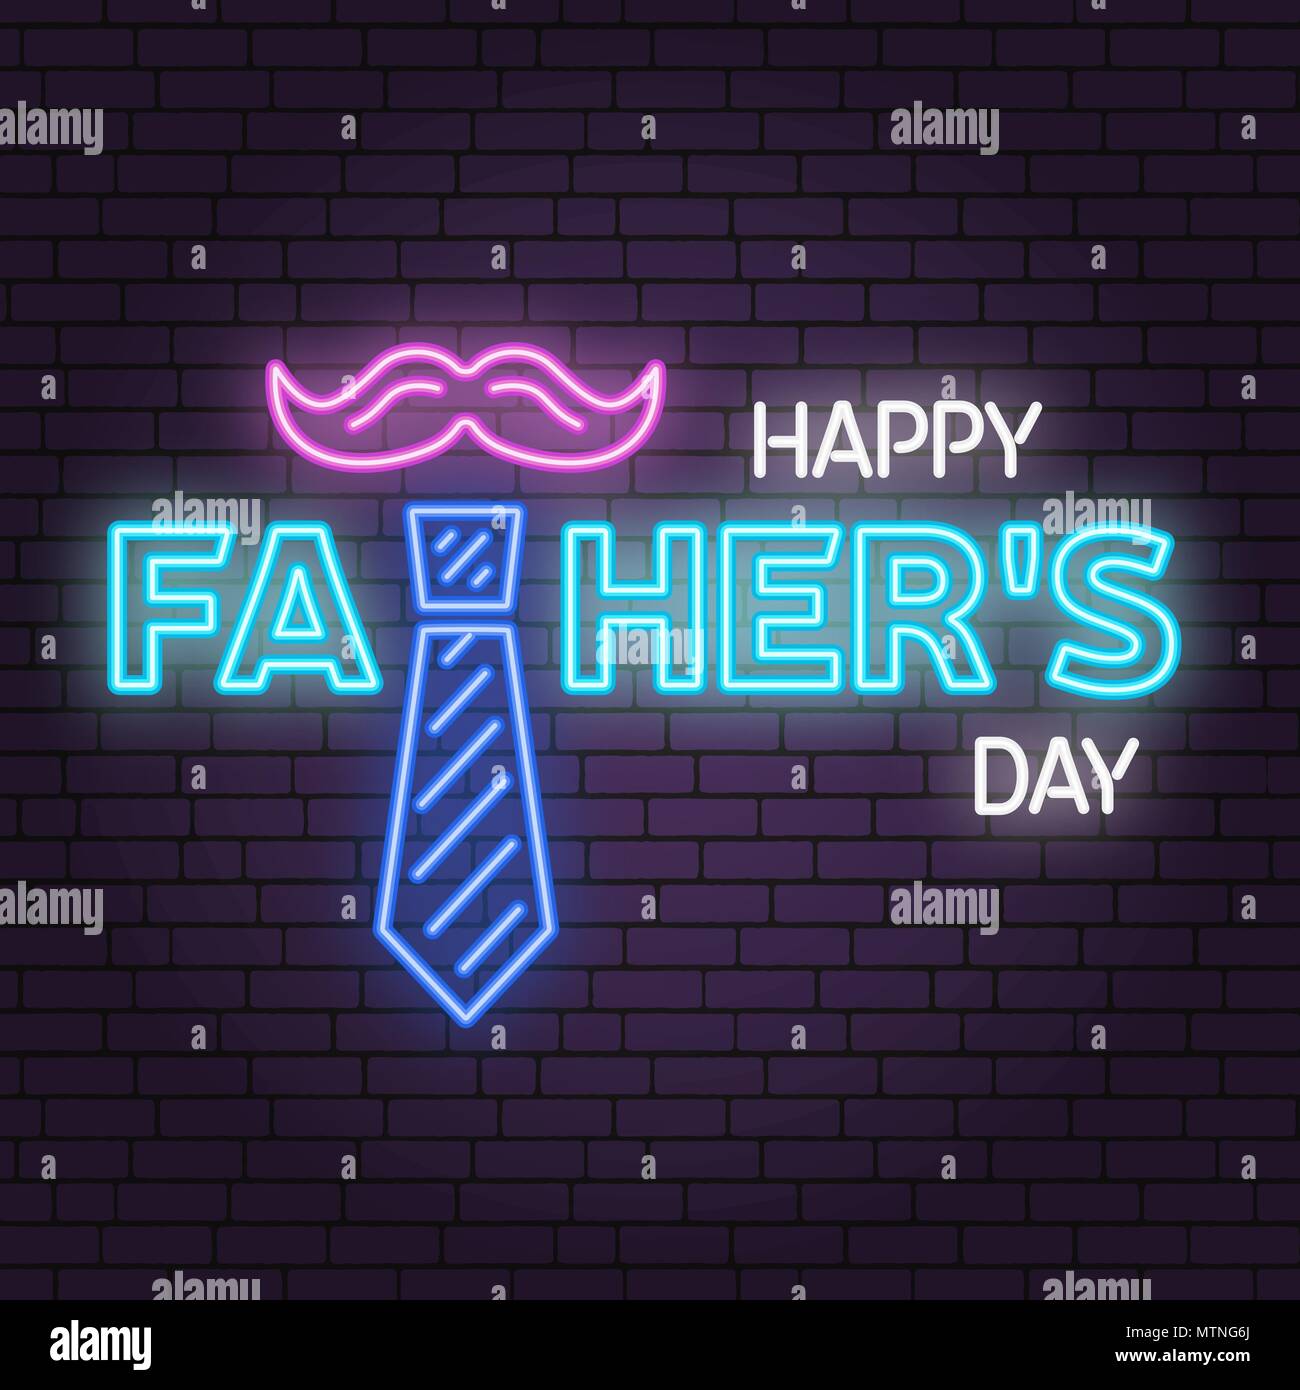 Happy Fathers Day sign on brick wall background. Neon design for Fathers Day. Vector illustration. Advertisement sign. Stock Vector